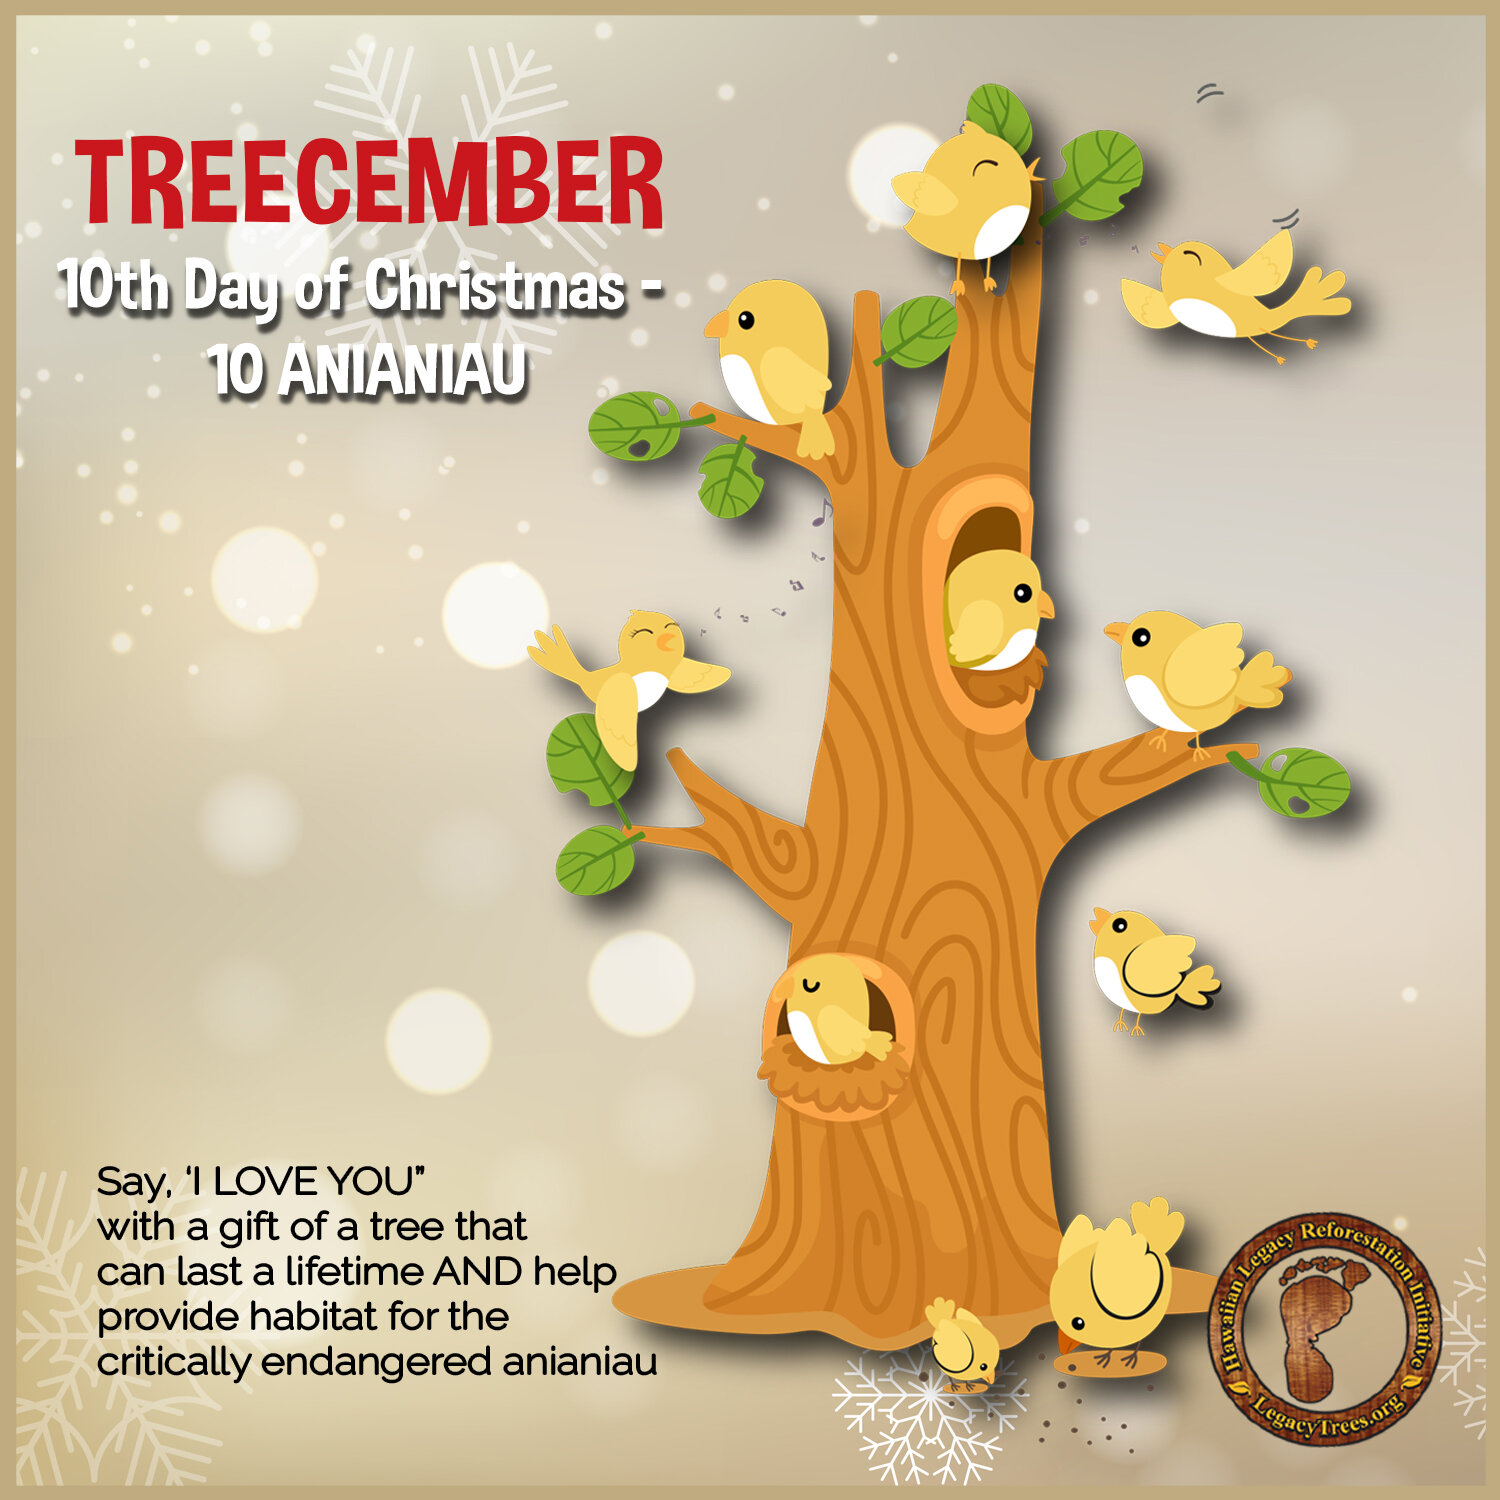 Small, cute and full of love.  Give a gift of a tree this holiday season.

Your gift of a native tree contributes to our environment by providing oxygen, improving air quality, climate amelioration, conserving water, preserving soil, and supporting w